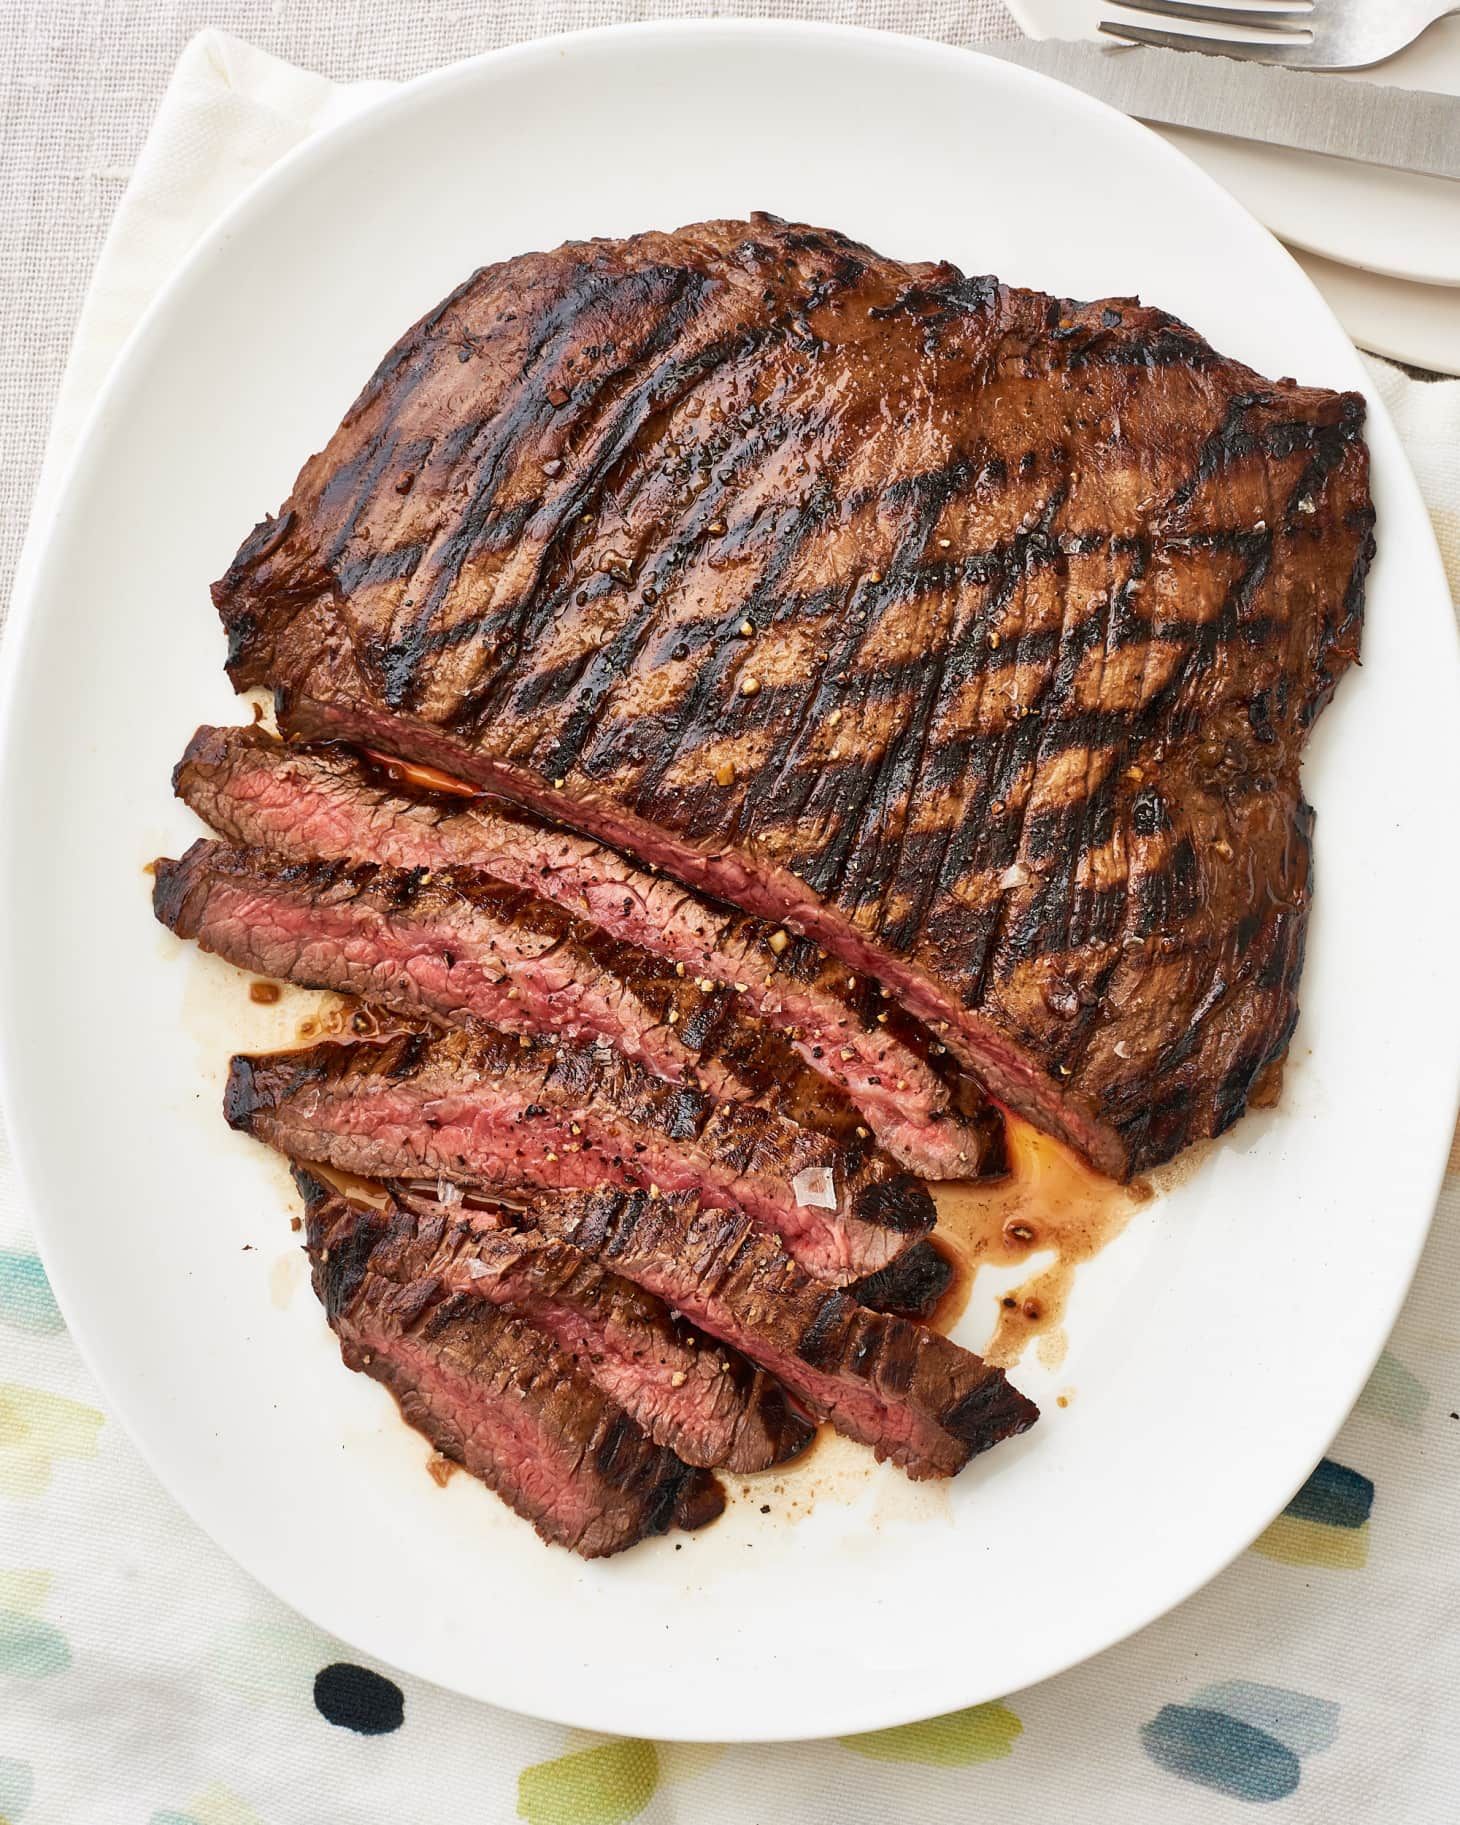 How To Make the Ultimate Marinade for Tender Grilled Steak